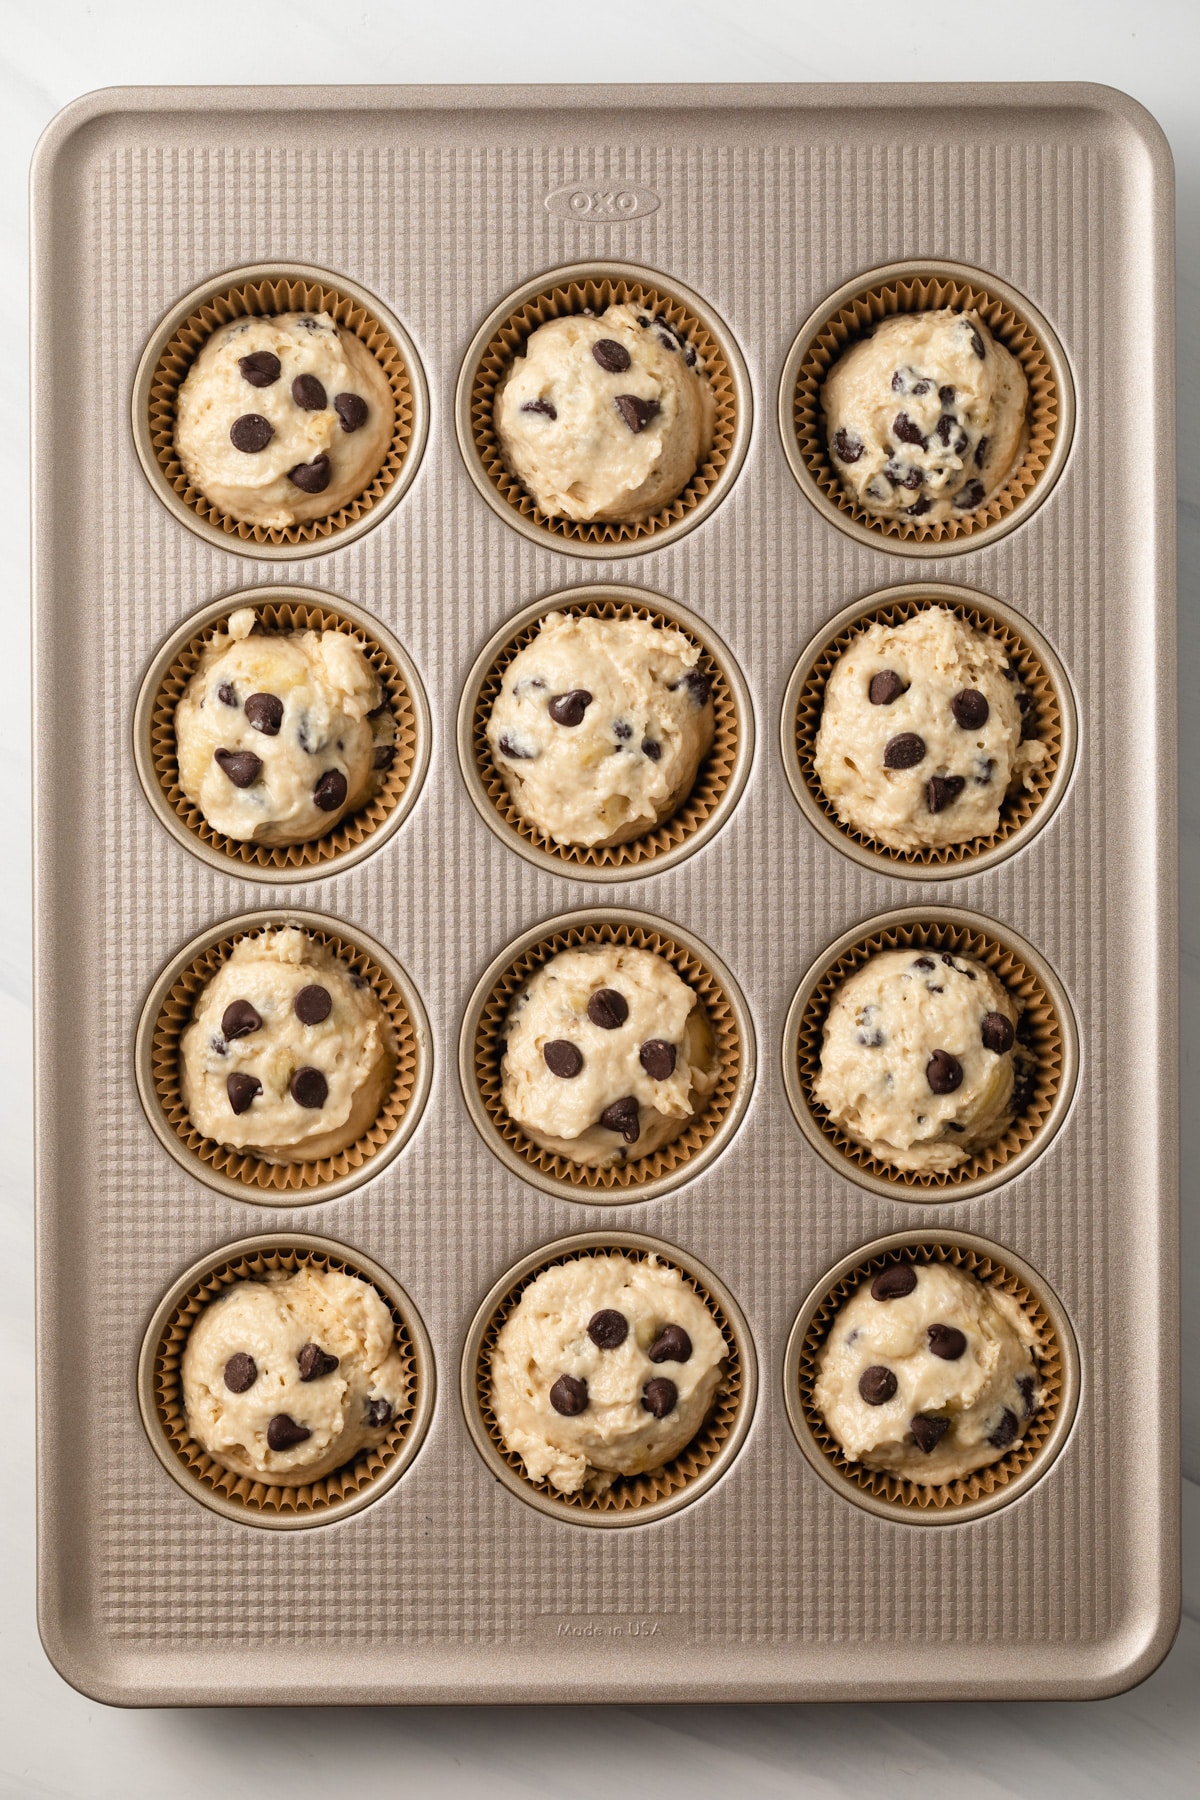 Unbaked banana chocolate chip muffins in muffin pan.